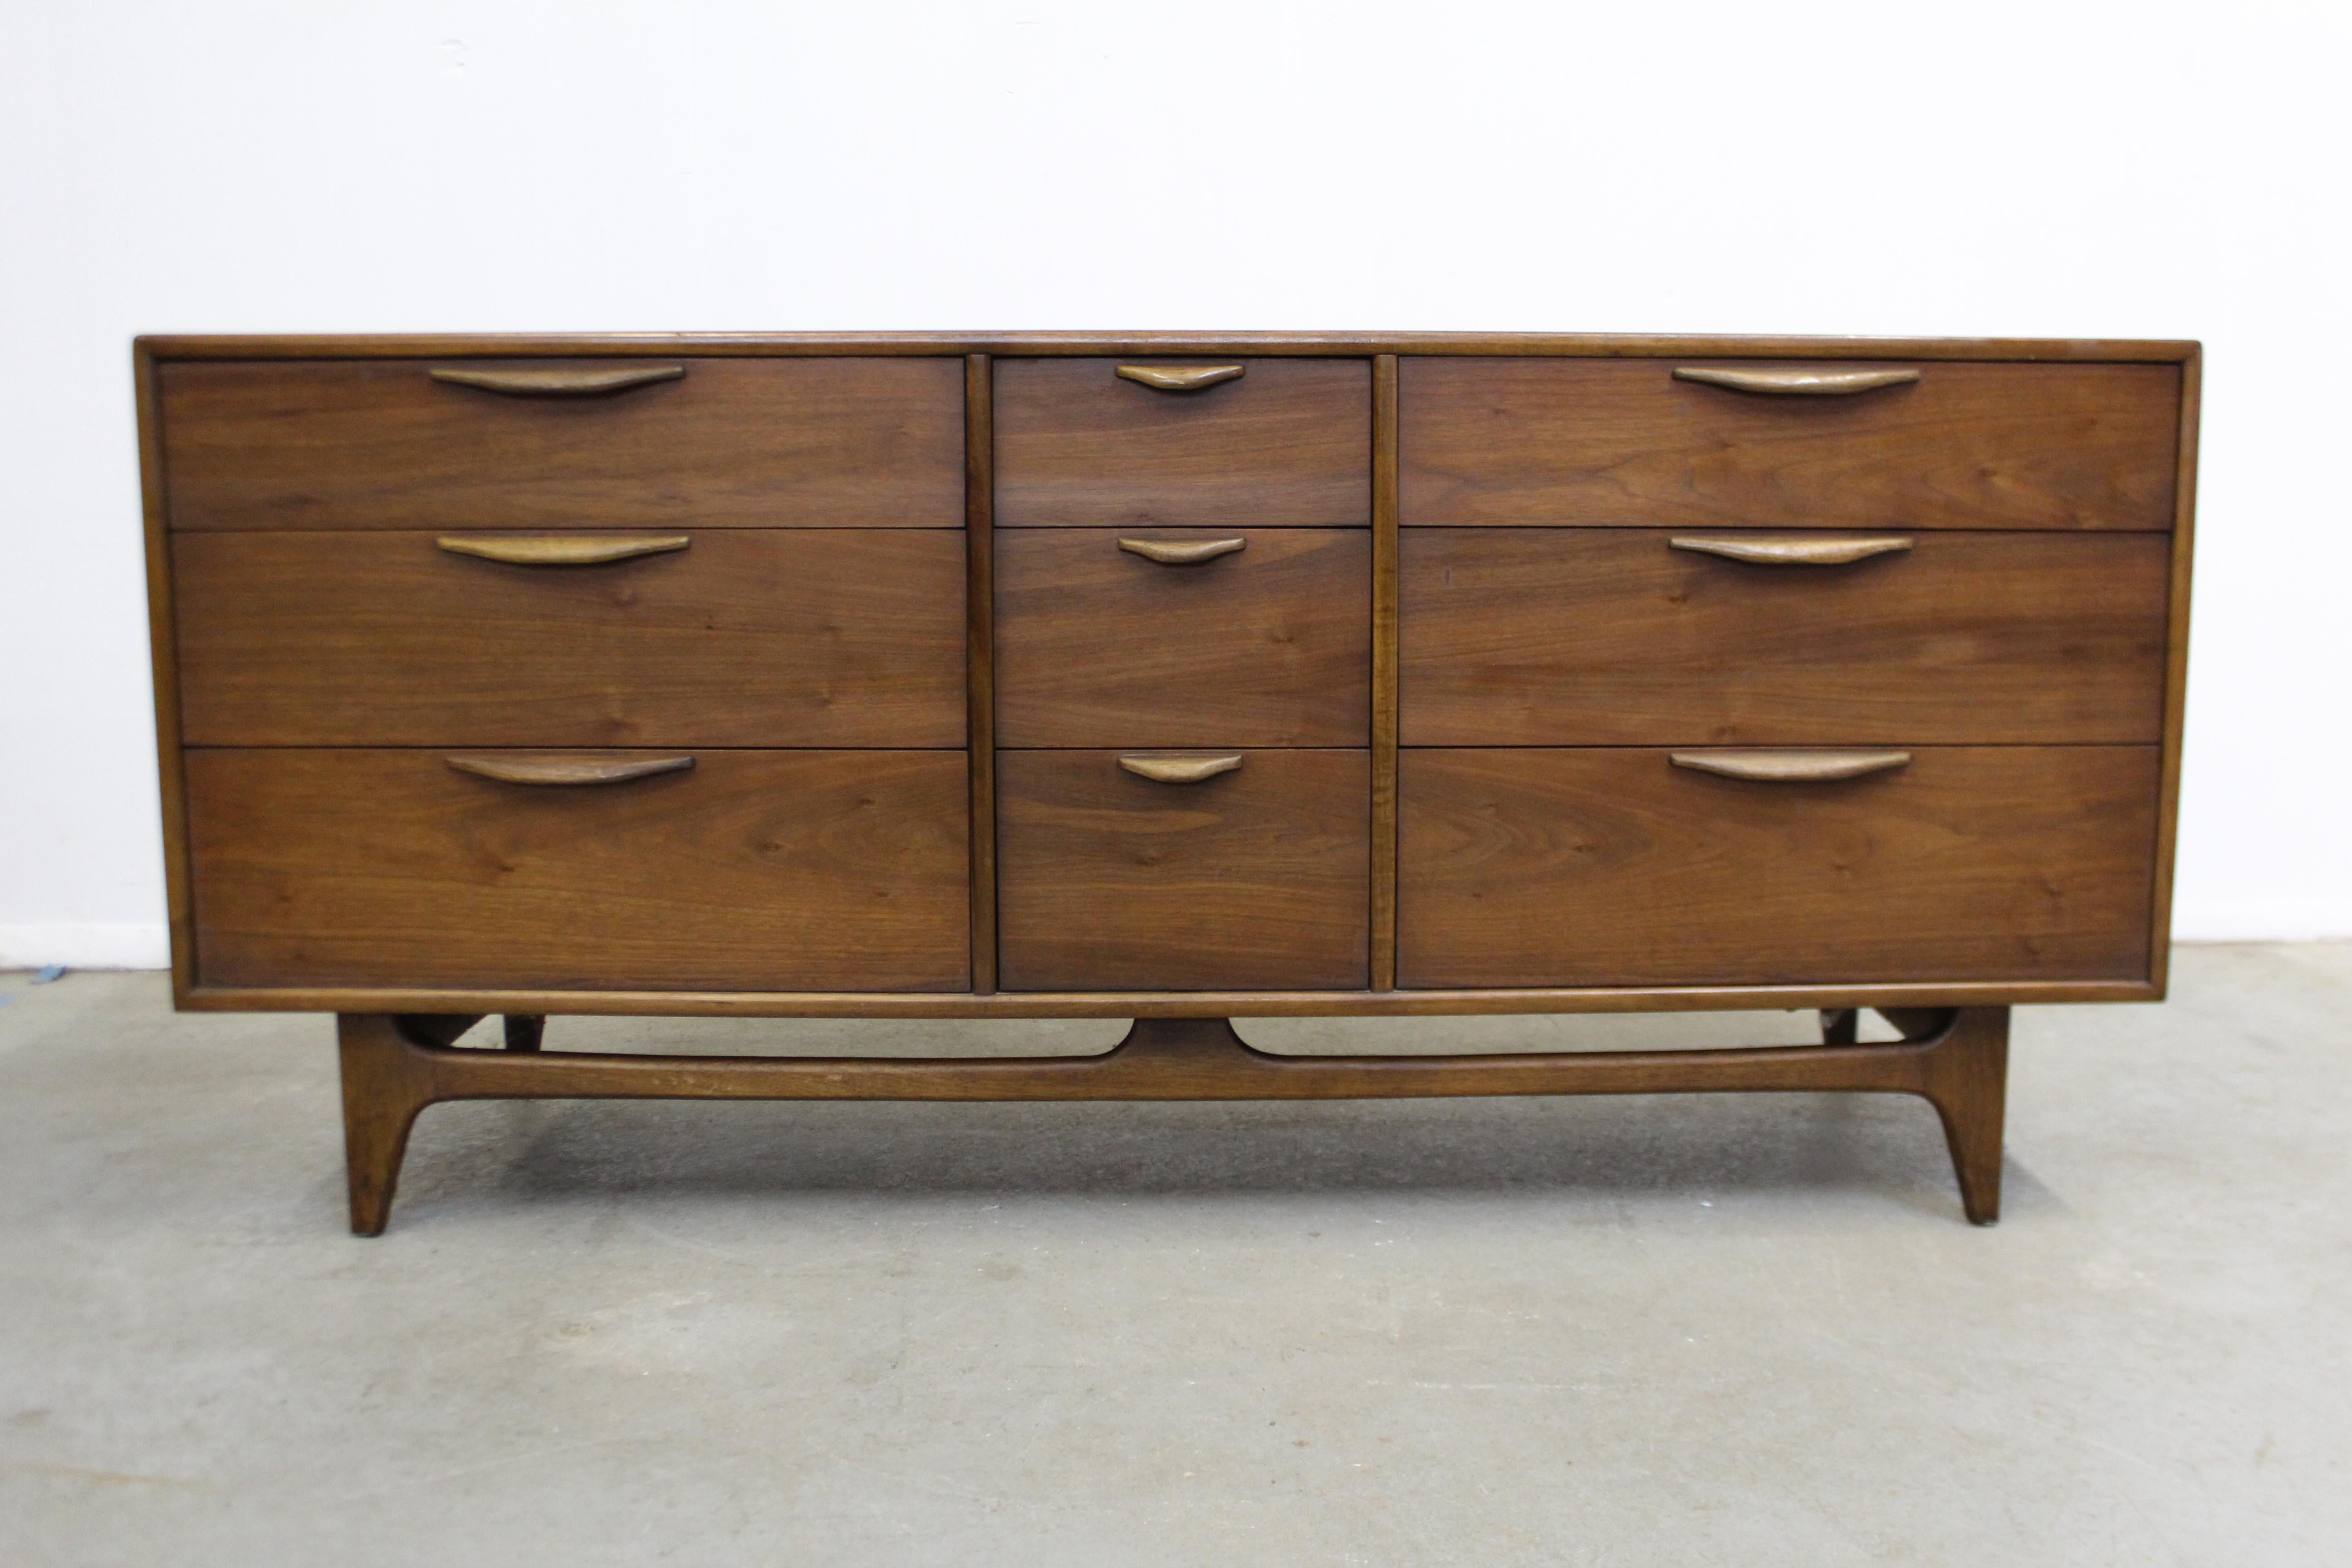 Offered is an excellent example of American Mid-Century Modern design; a walnut triple dresser designed by Warren Church for Lane furniture's 'Perception' line. Features 9 dovetailed drawers with sculpted pulls. It is in excellent condition for its